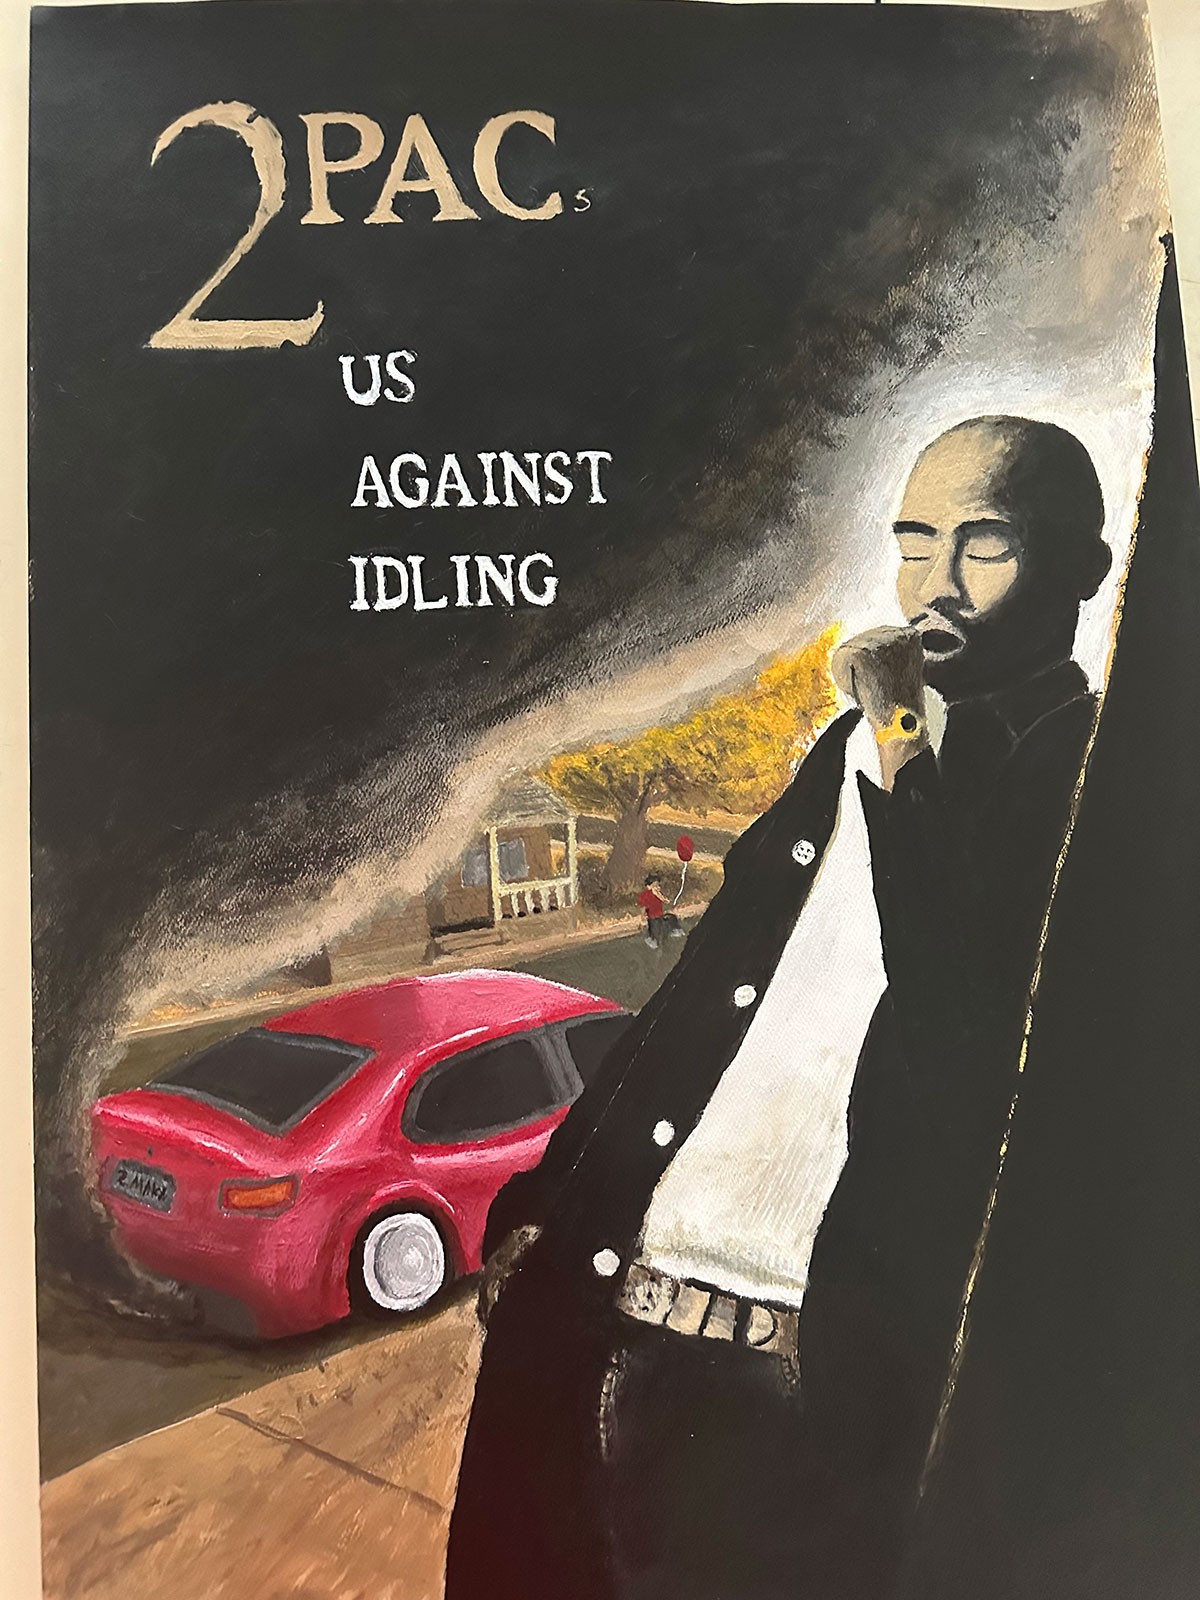 Text Reads: 2Pac. Us Against Idling.